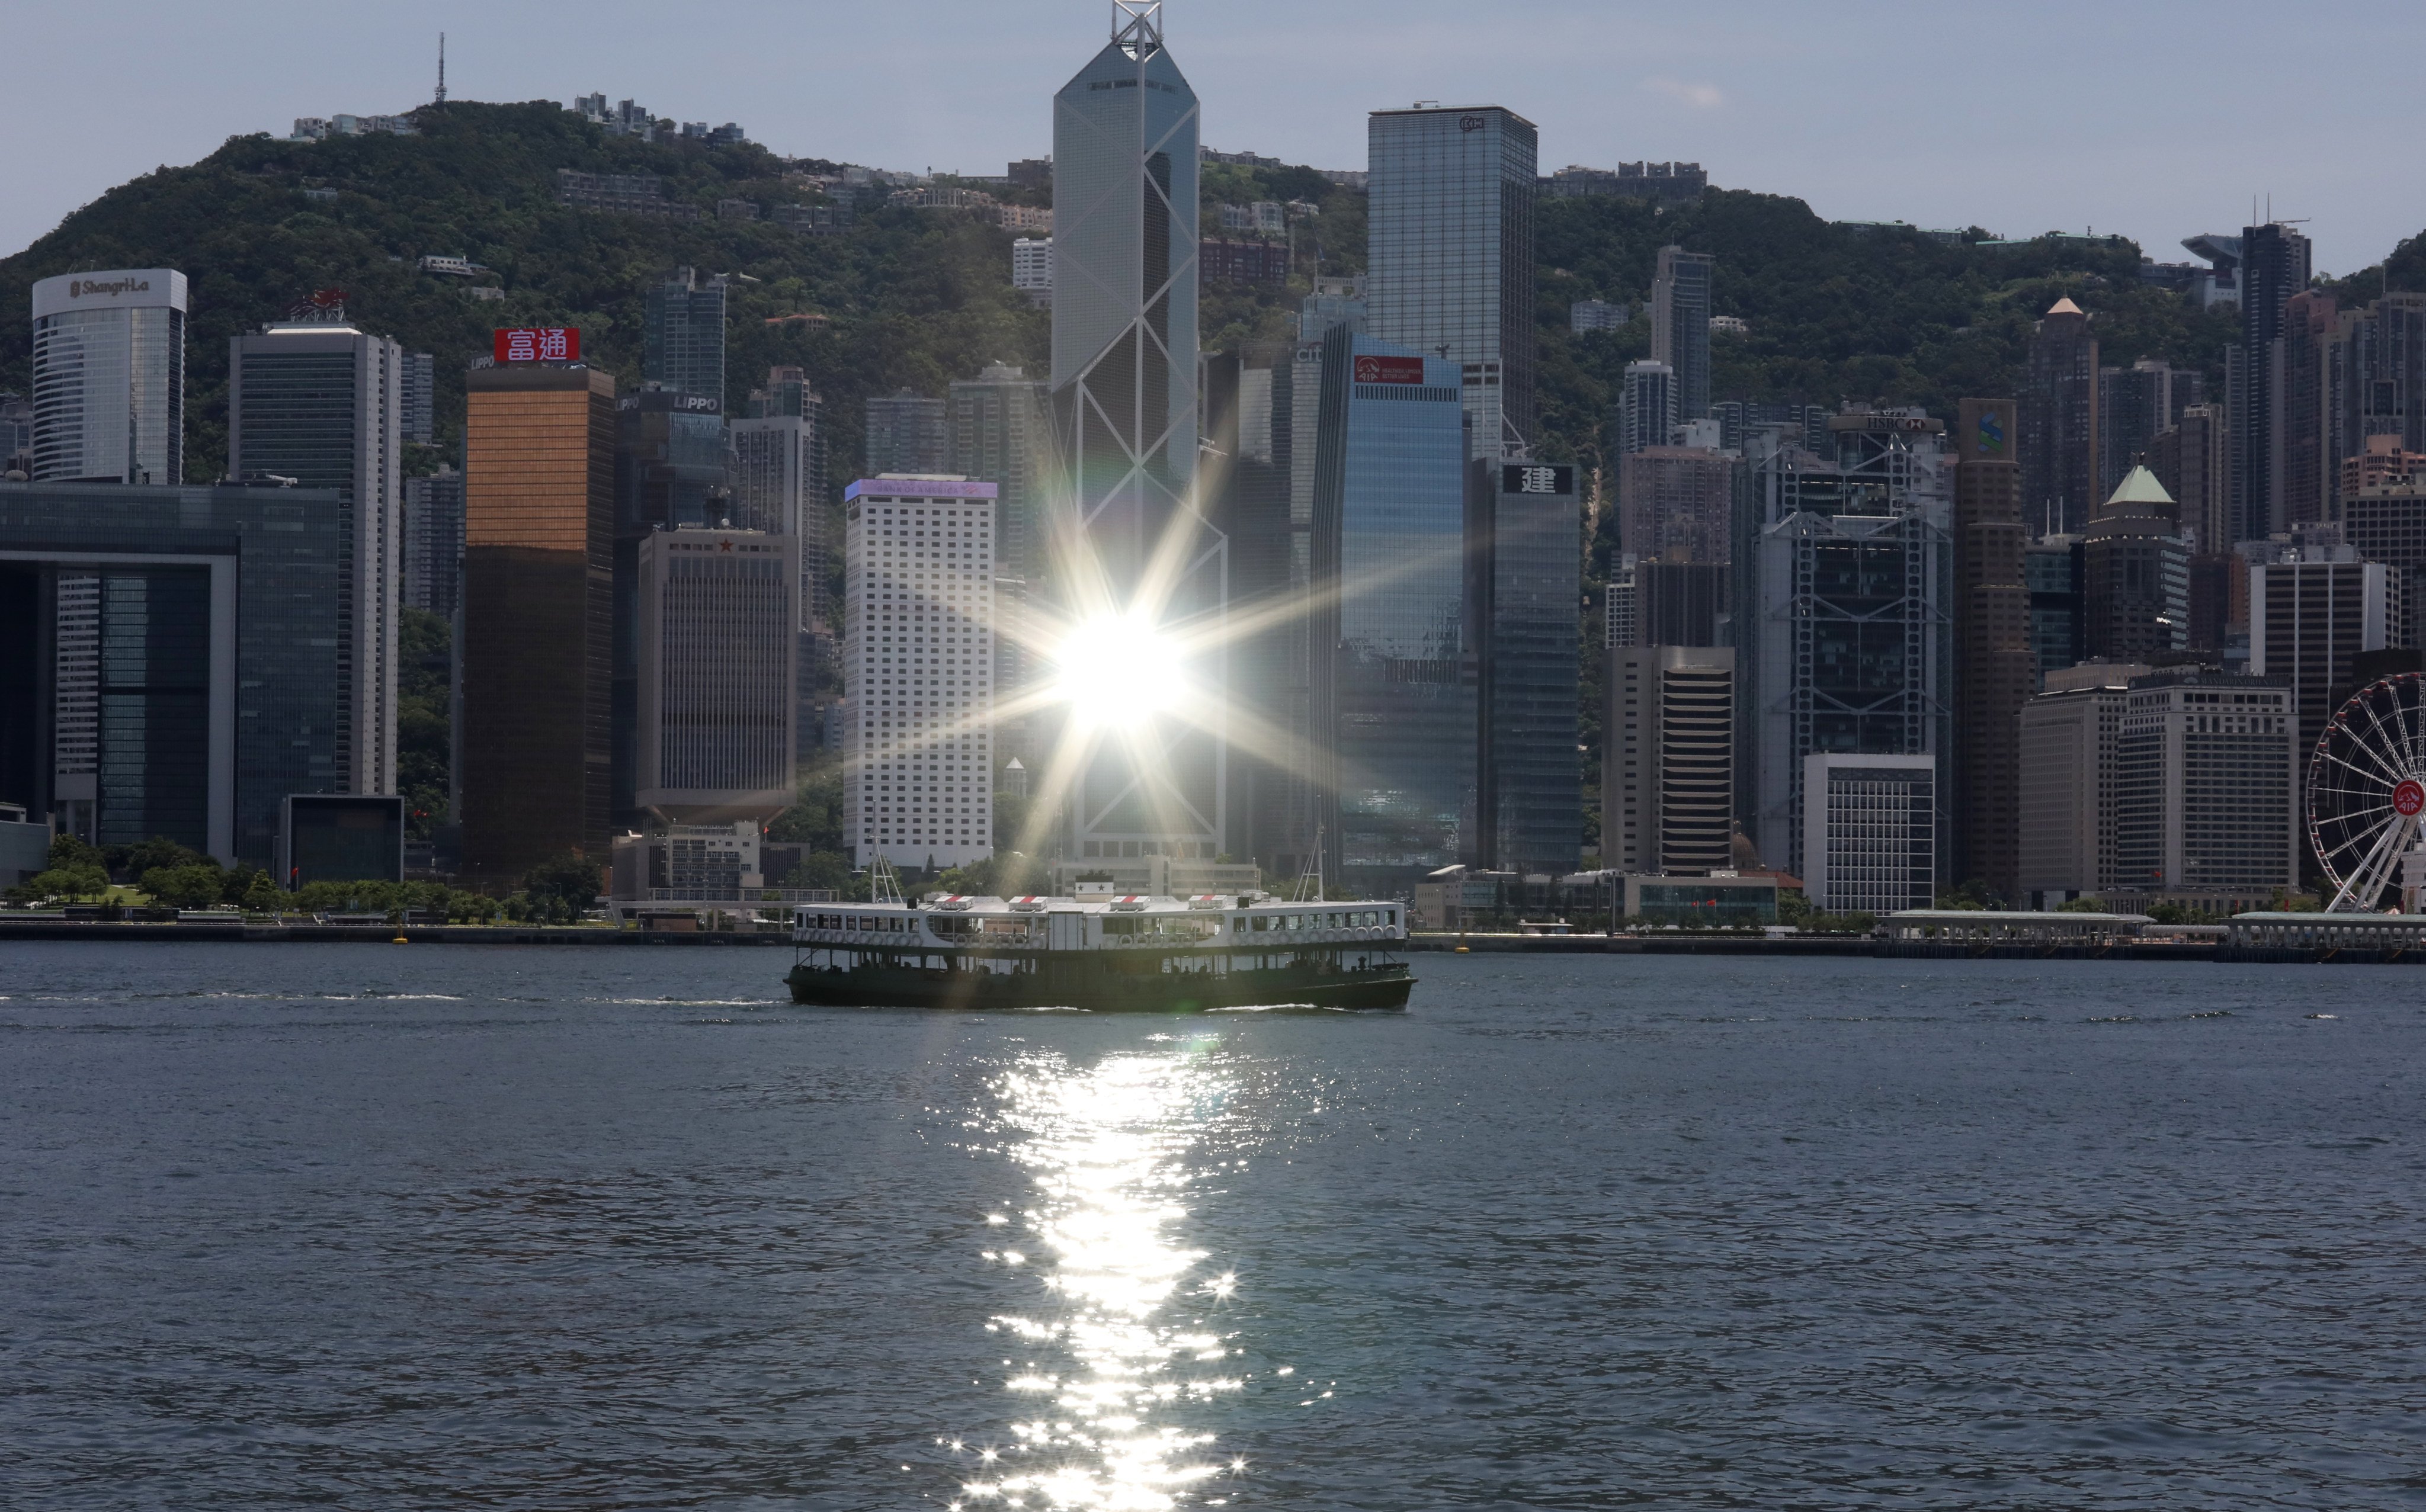 Hong Kong might enjoy the best of both worlds in the data trading industry thanks to the “one country, two systems” governing principle, a minister has said. Photo: Nora Tam